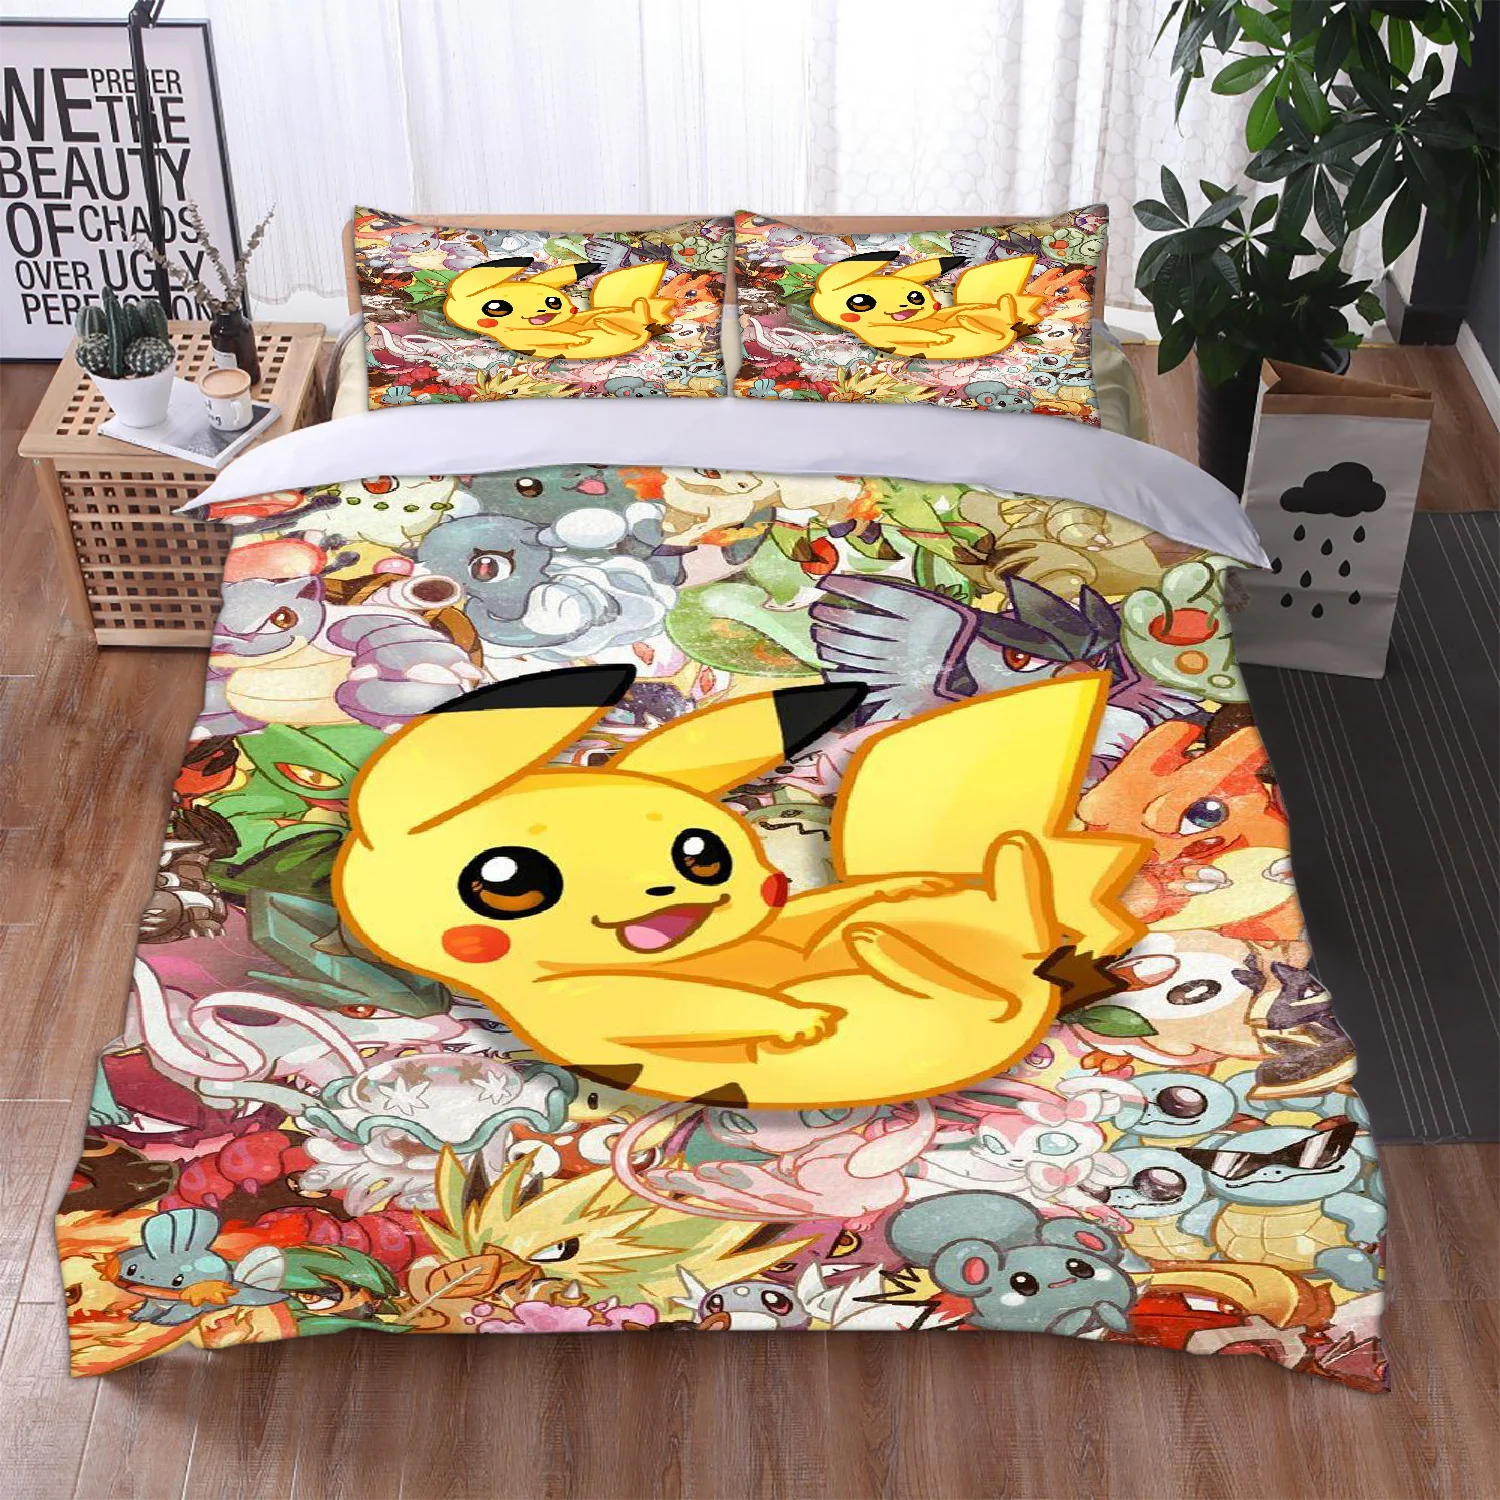 POKEMON CATCH DOUBLE DUVET COVER AND PILLOWCASE SET MATCHING 72" CURTAINS NEW 